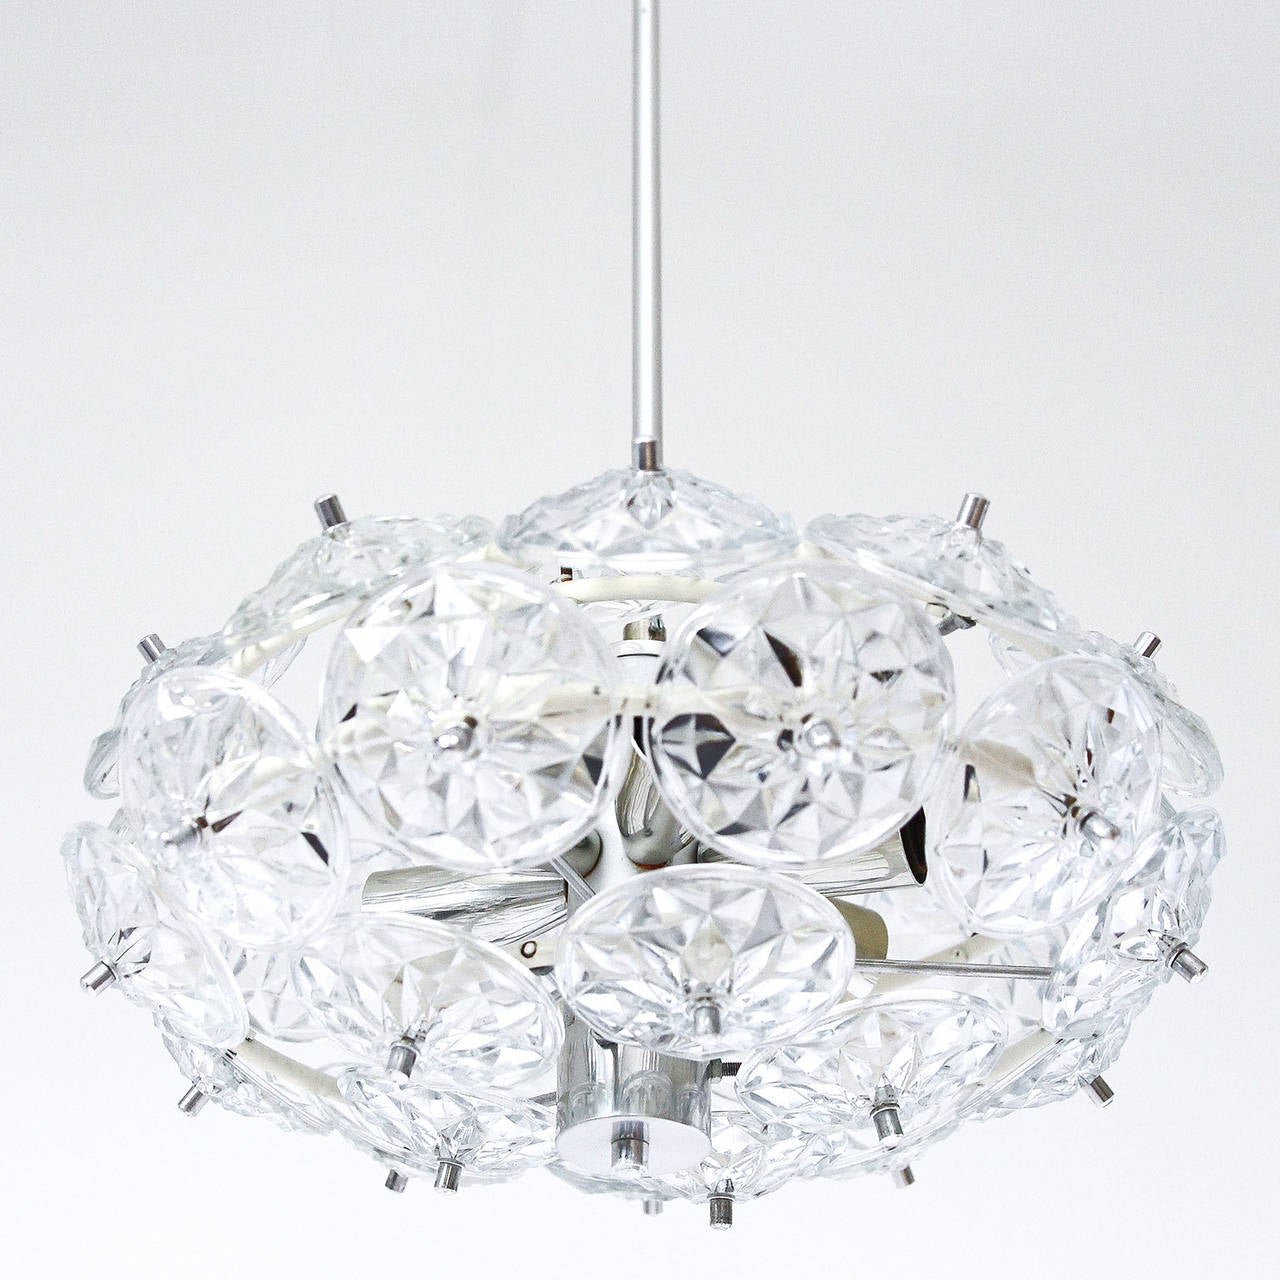 A German enameled and chromed glass sputnik pendant light / chandelier in the style of Kinkeldey, manufactured in Mid-Century.
The lamp takes six small screw base Edison bulbs (type E14) up to max. 40W per bulb and it is compatible with US/UK/ etc.